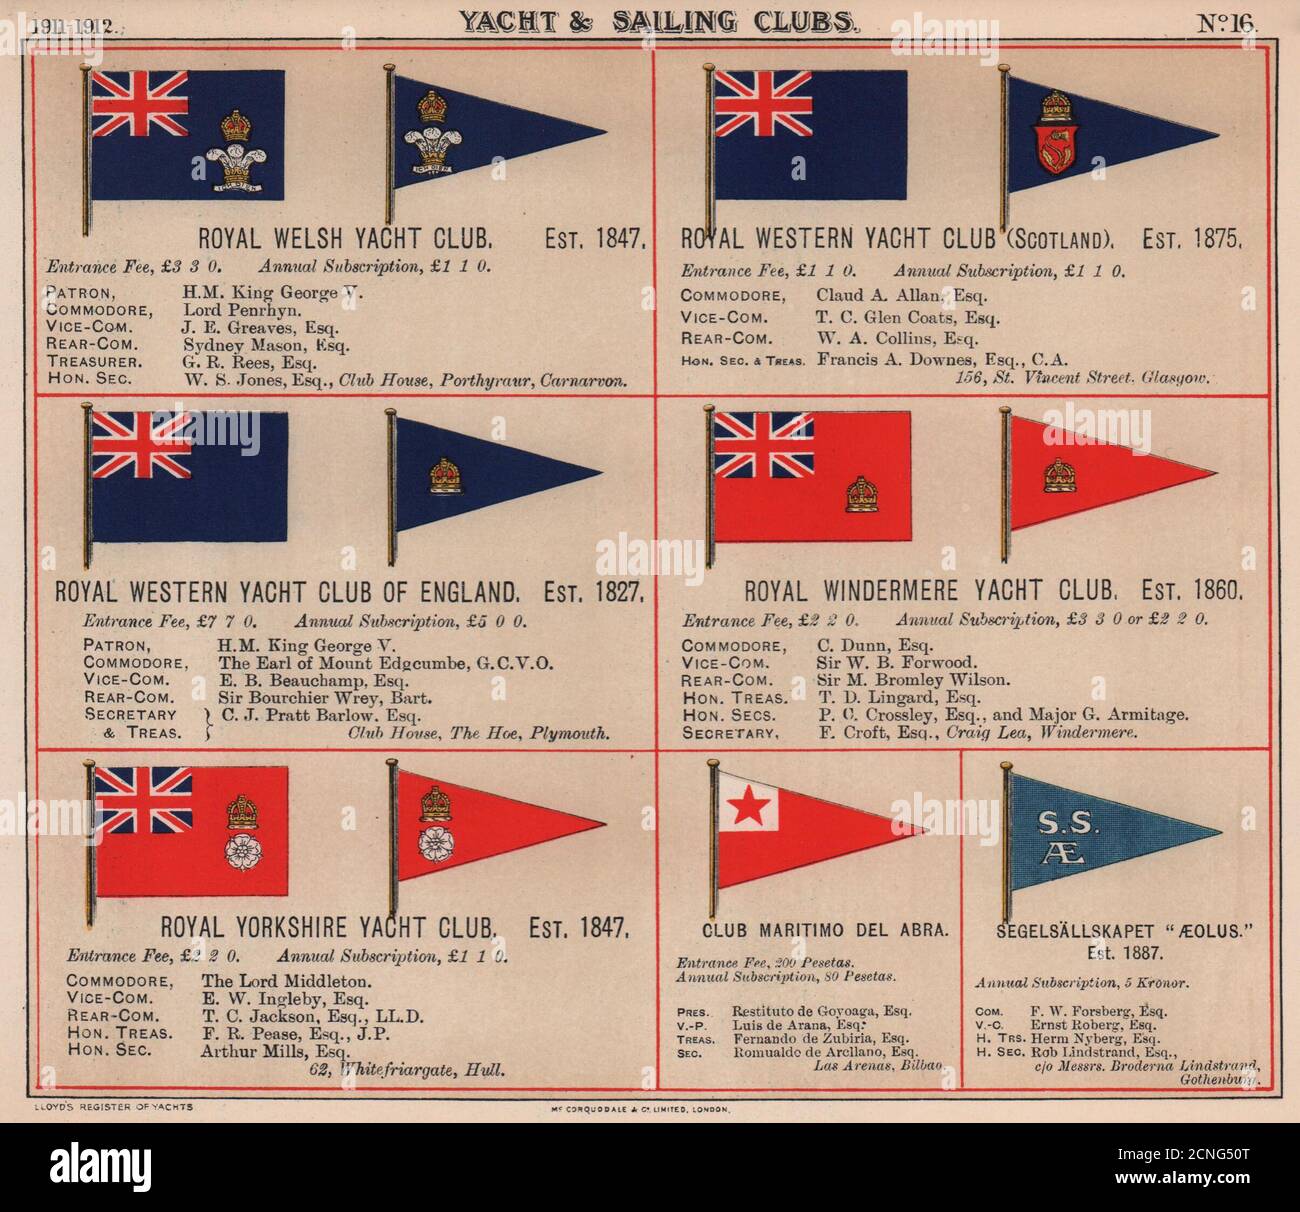 ROYAL YACHT & SAILING CLUB FLAGS W-Y Welsh Windermere Yorkshire Abra Aeolus 1911 Banque D'Images